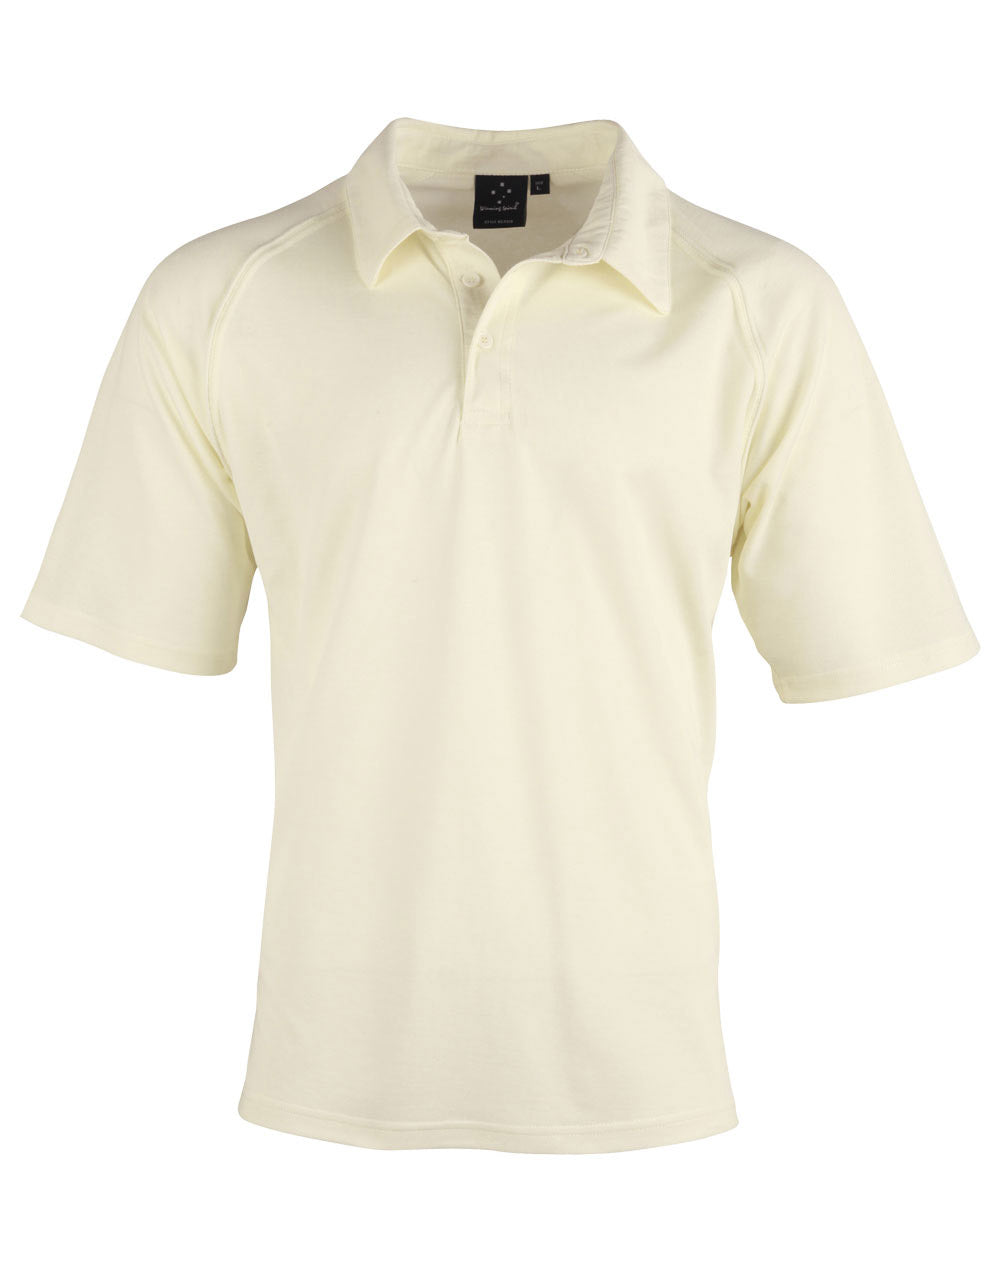 [PS29] Mens cooldry cricket polo